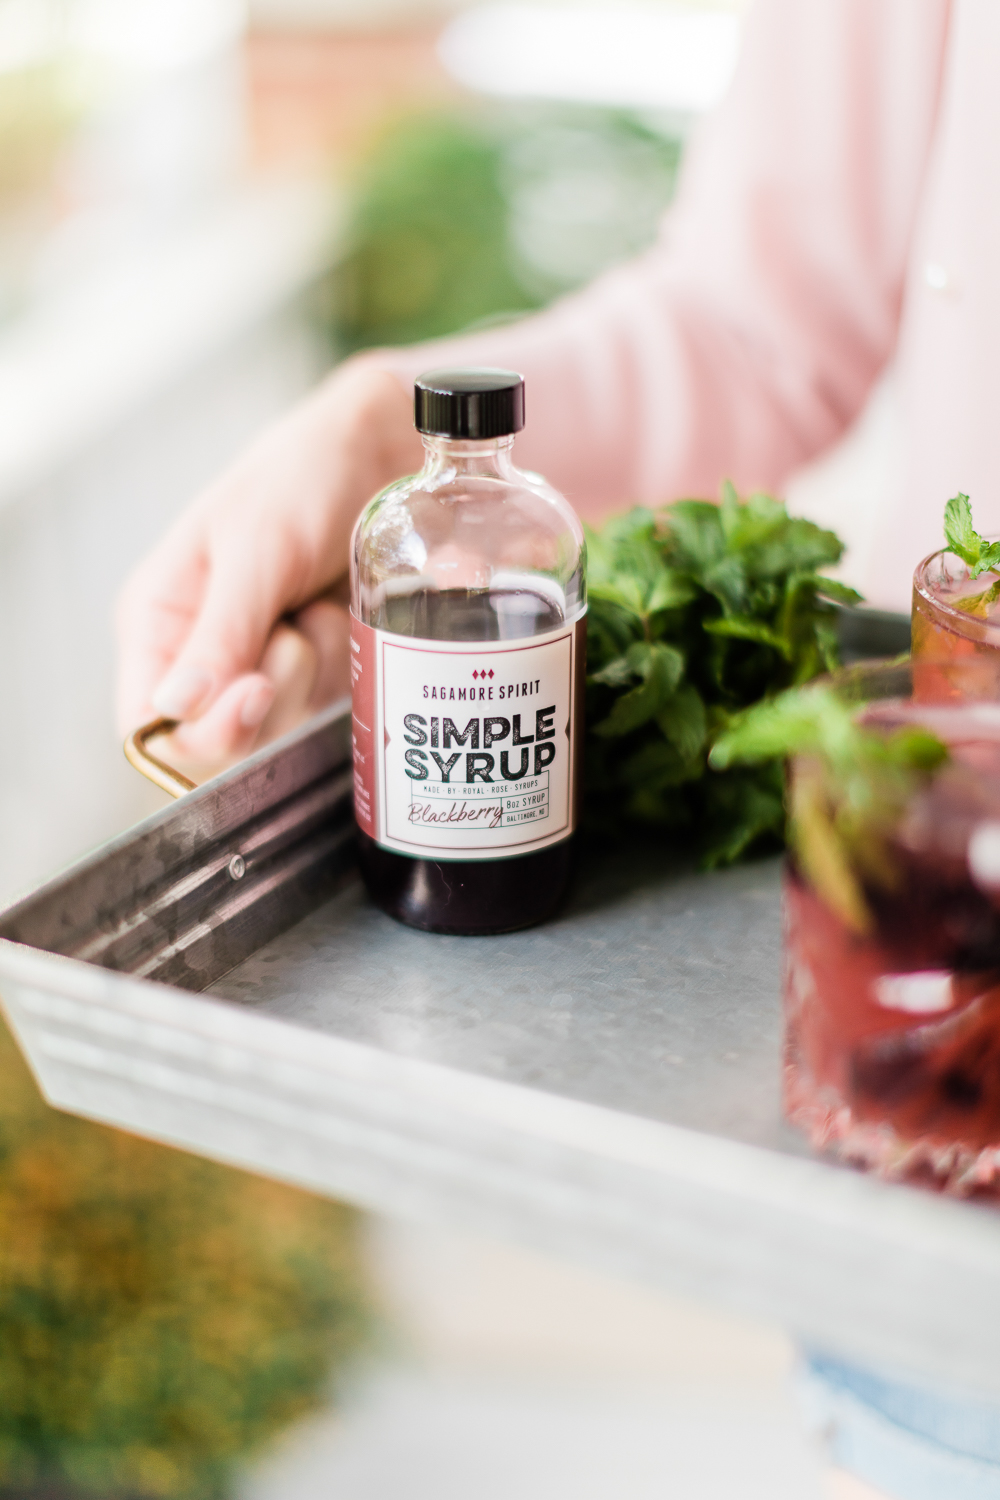 Preakness-Approved Blackberry Whiskey Cocktail: Black-Eyed Rye by southern lifestyle blogger Stephanie Ziajka from Diary of a Debutante, blackberry cocktail recipes, Sagamore Spirit Black-Eyed Rye recipe, Derby Day drink recipes, Sagamore Spirit Blackberry Simple Syrup